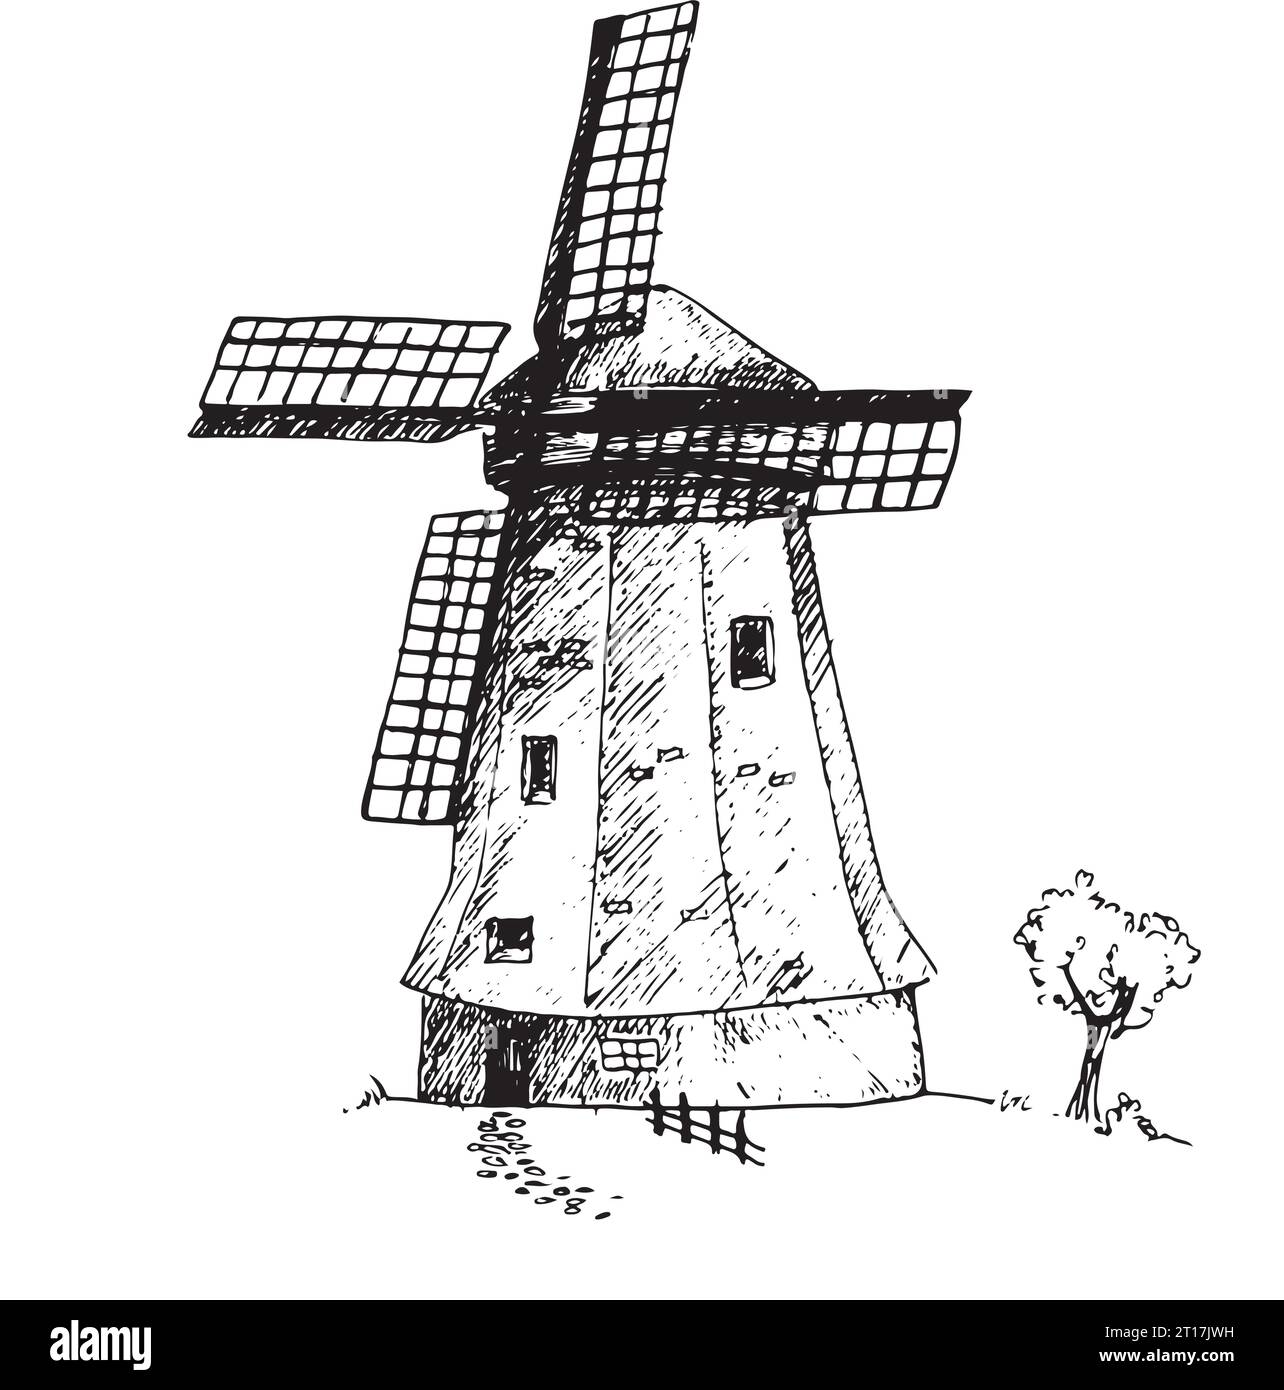 How to Draw Wind Energy (Windmills) Step by Step | DrawingTutorials101.com